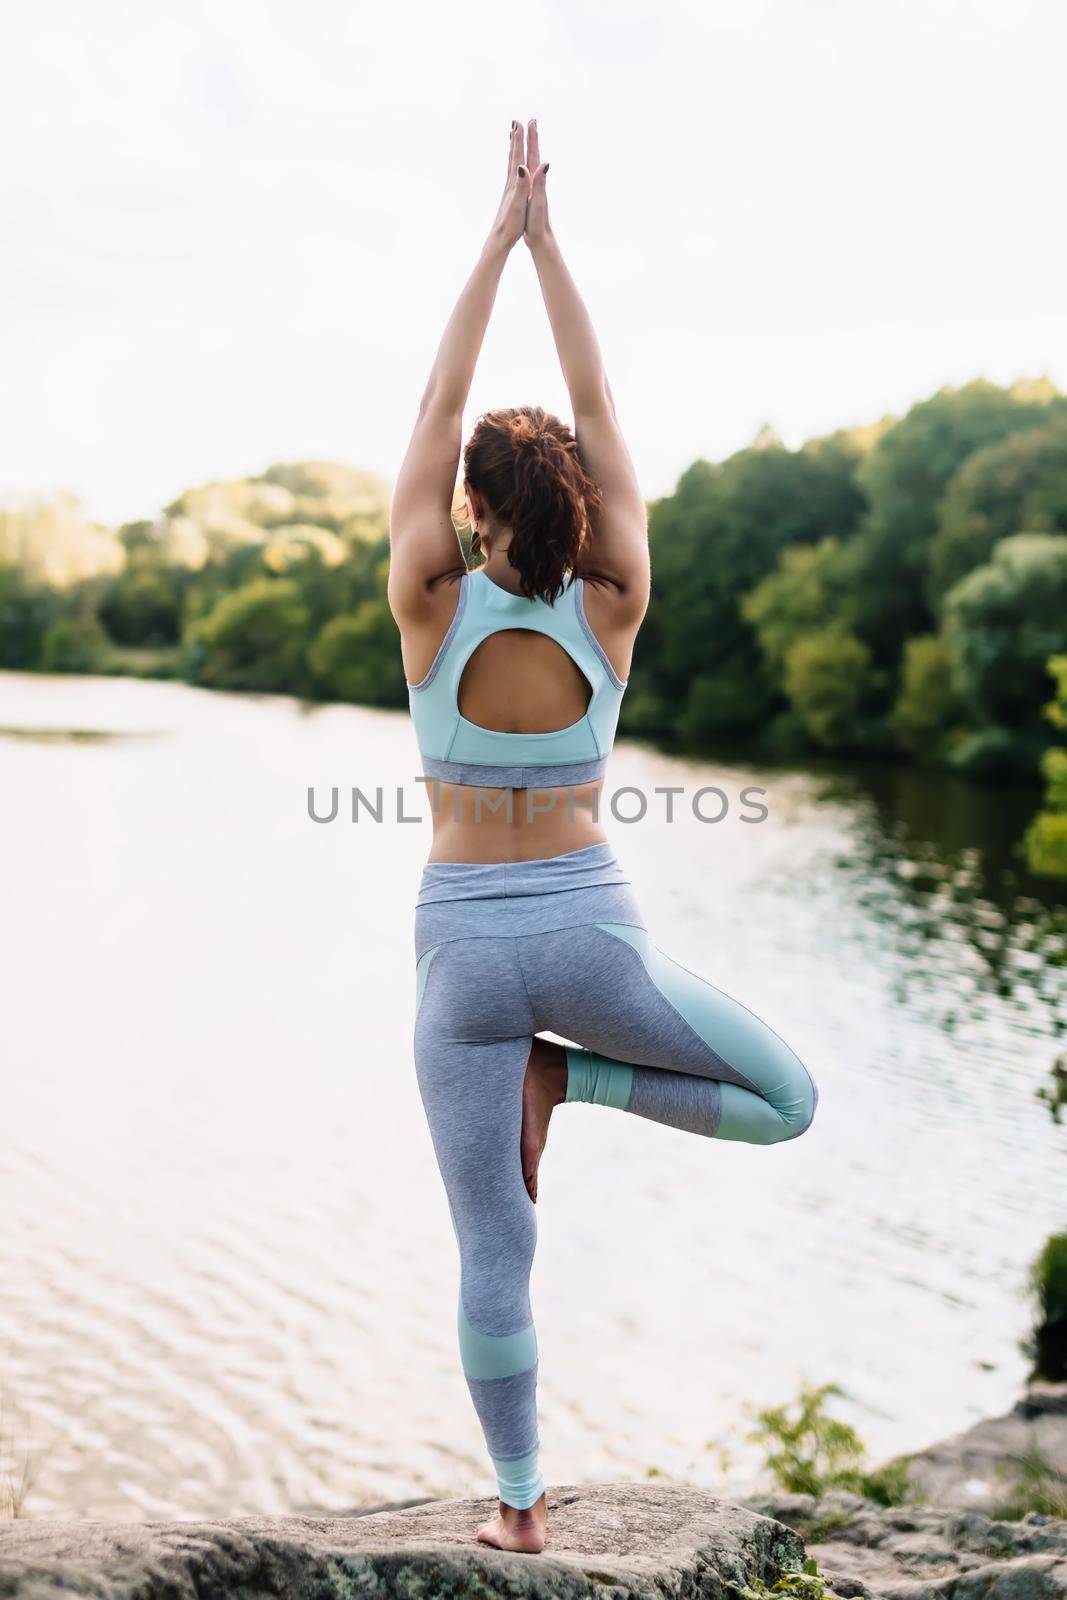 Pretty woman doing yoga exercises in the park on water background